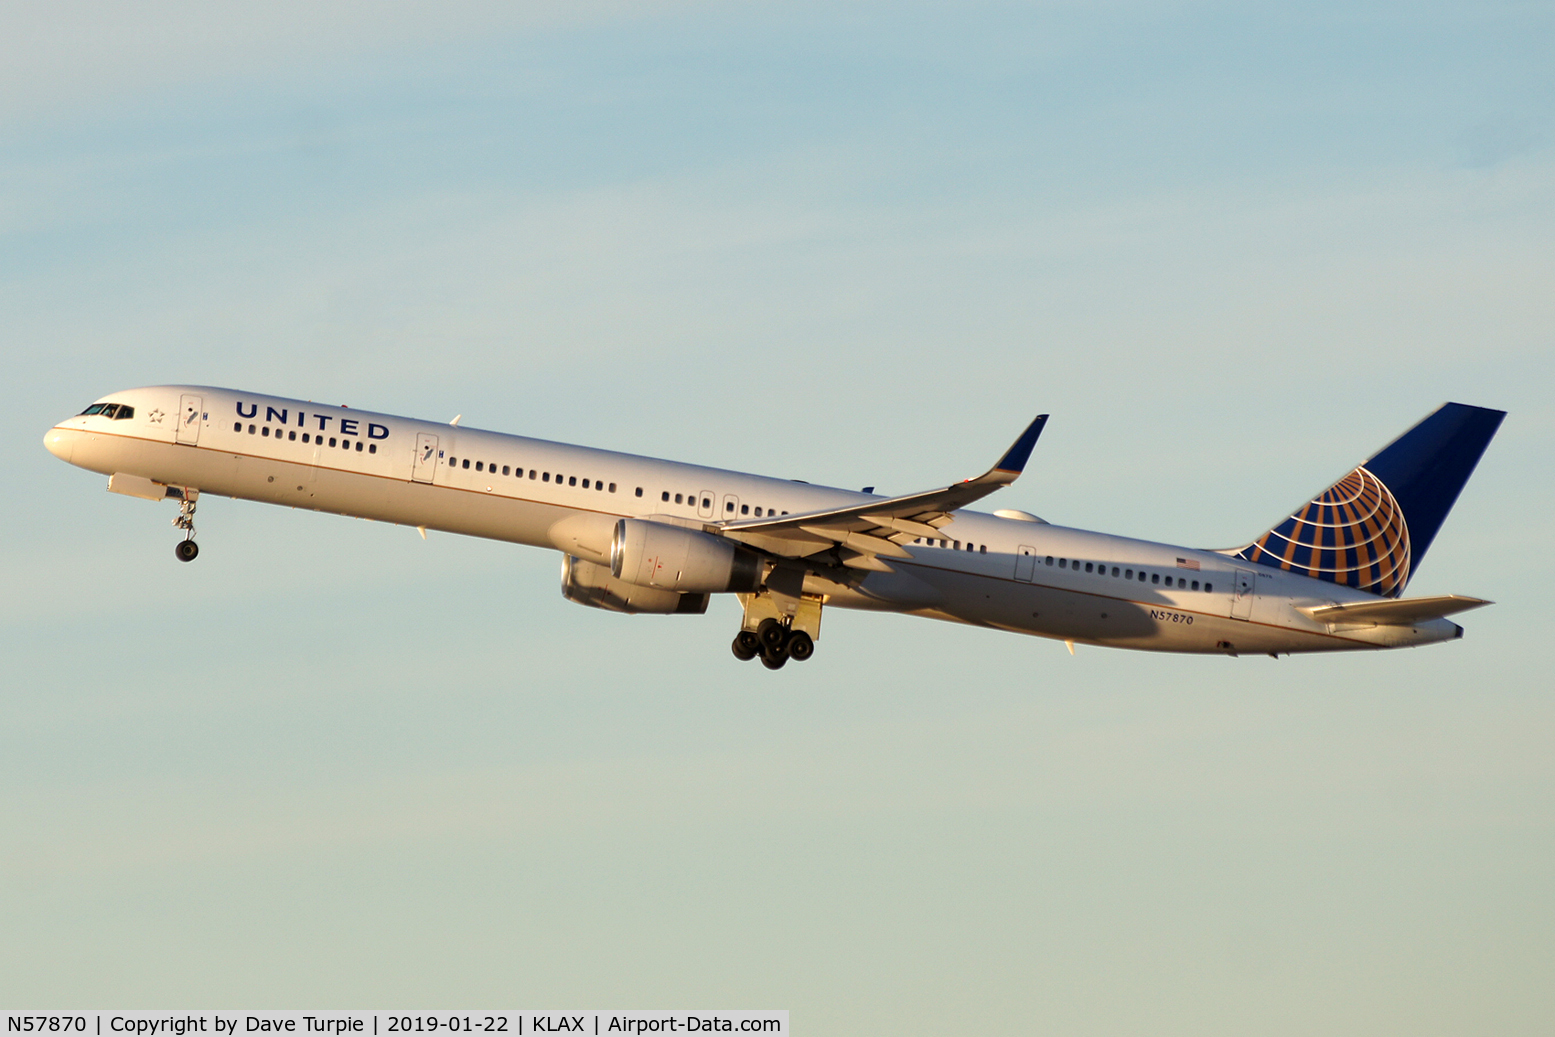 N57870, 2003 Boeing 757-33N C/N 33525, Originally with Continental Airlines with the same registration.